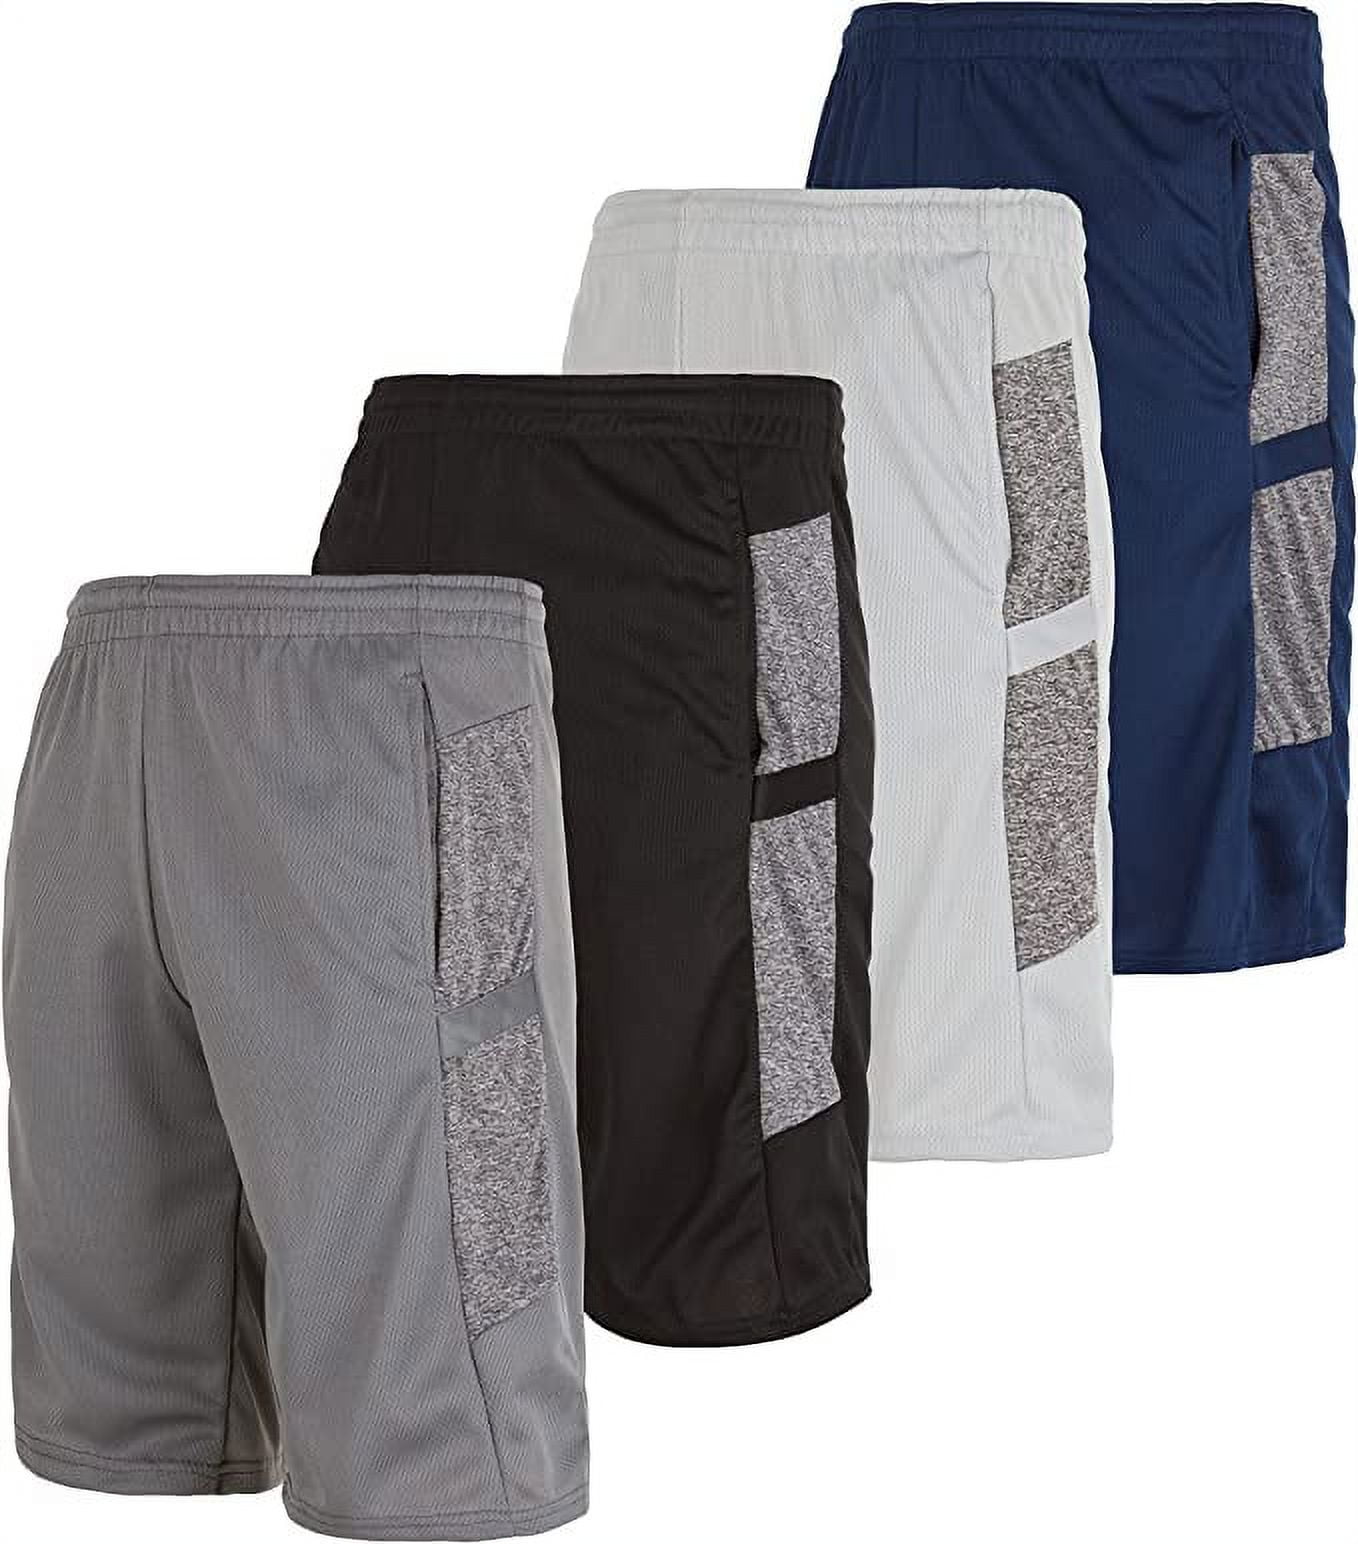 X Game Time - 4 Pack Men's Active Mesh Basketball Shorts Athletic ...